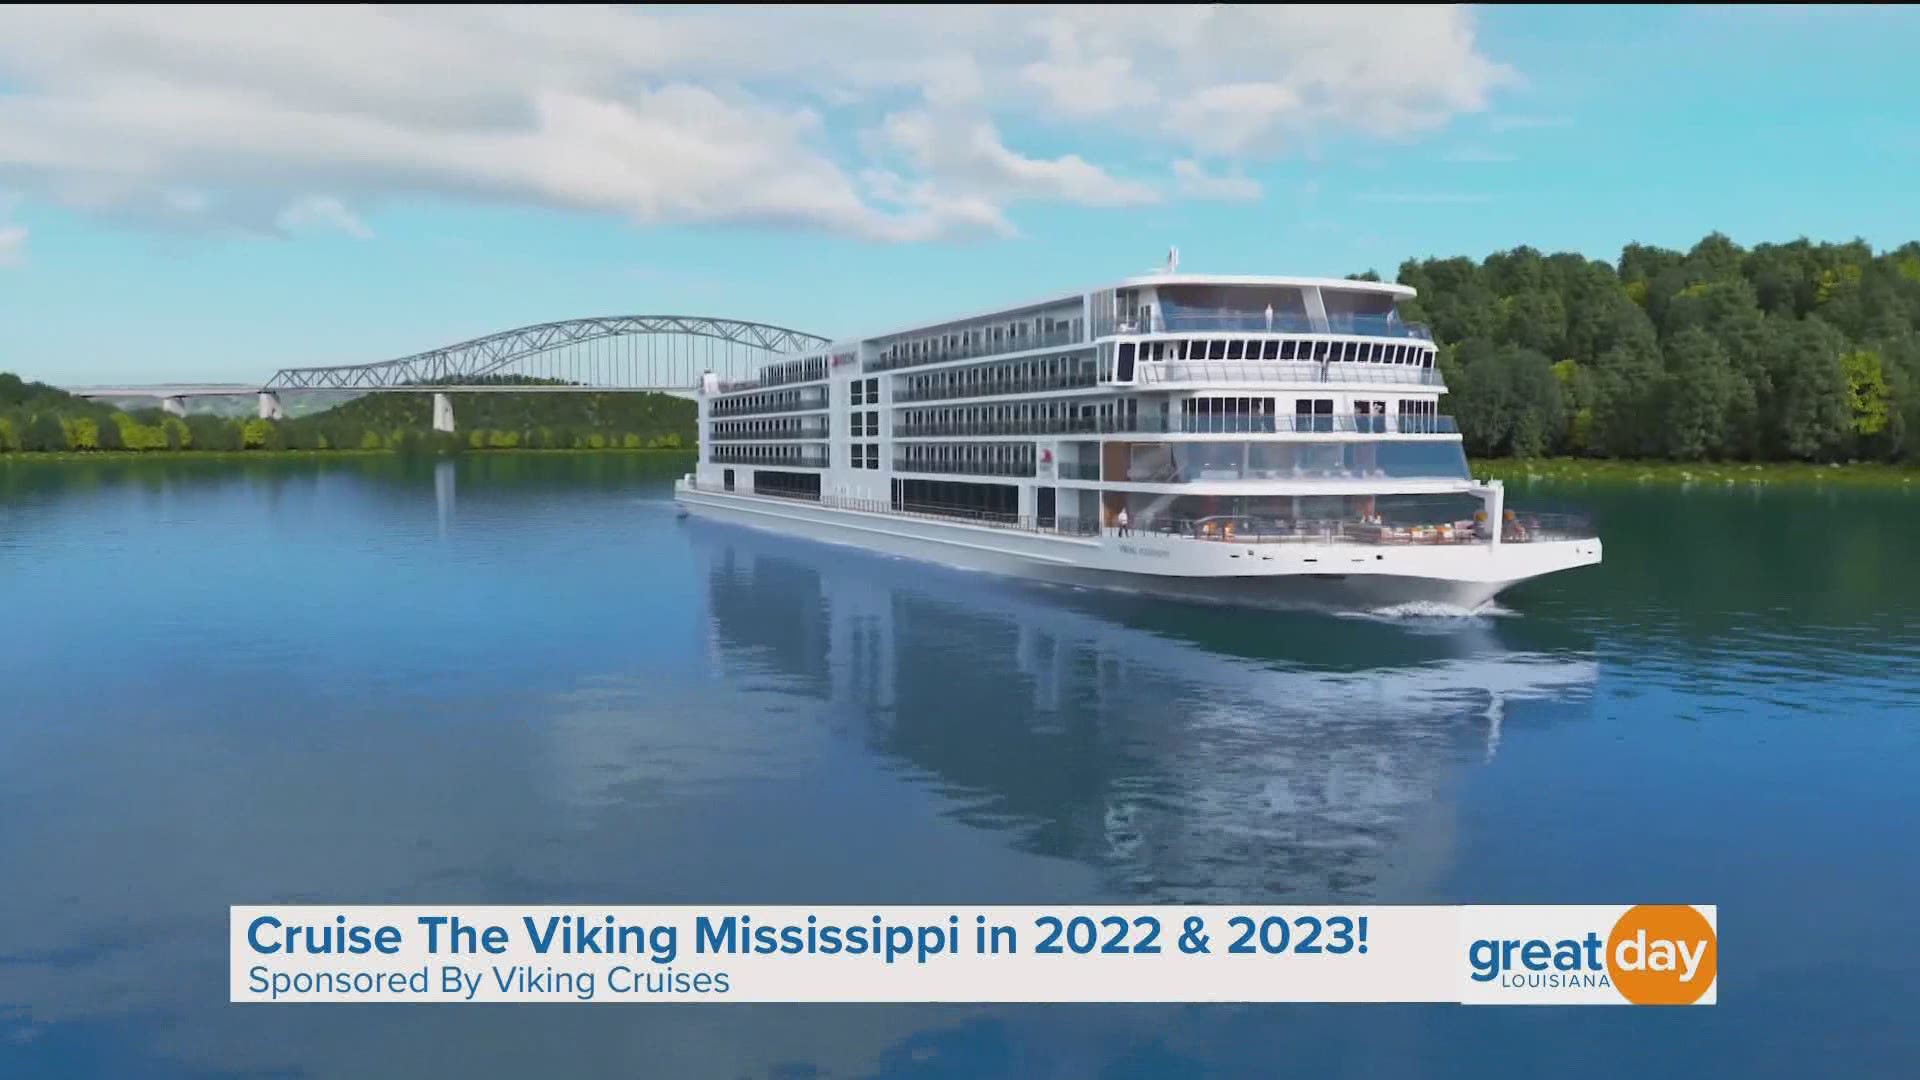 Cruise the Viking Mississippi in 2022 & 2023